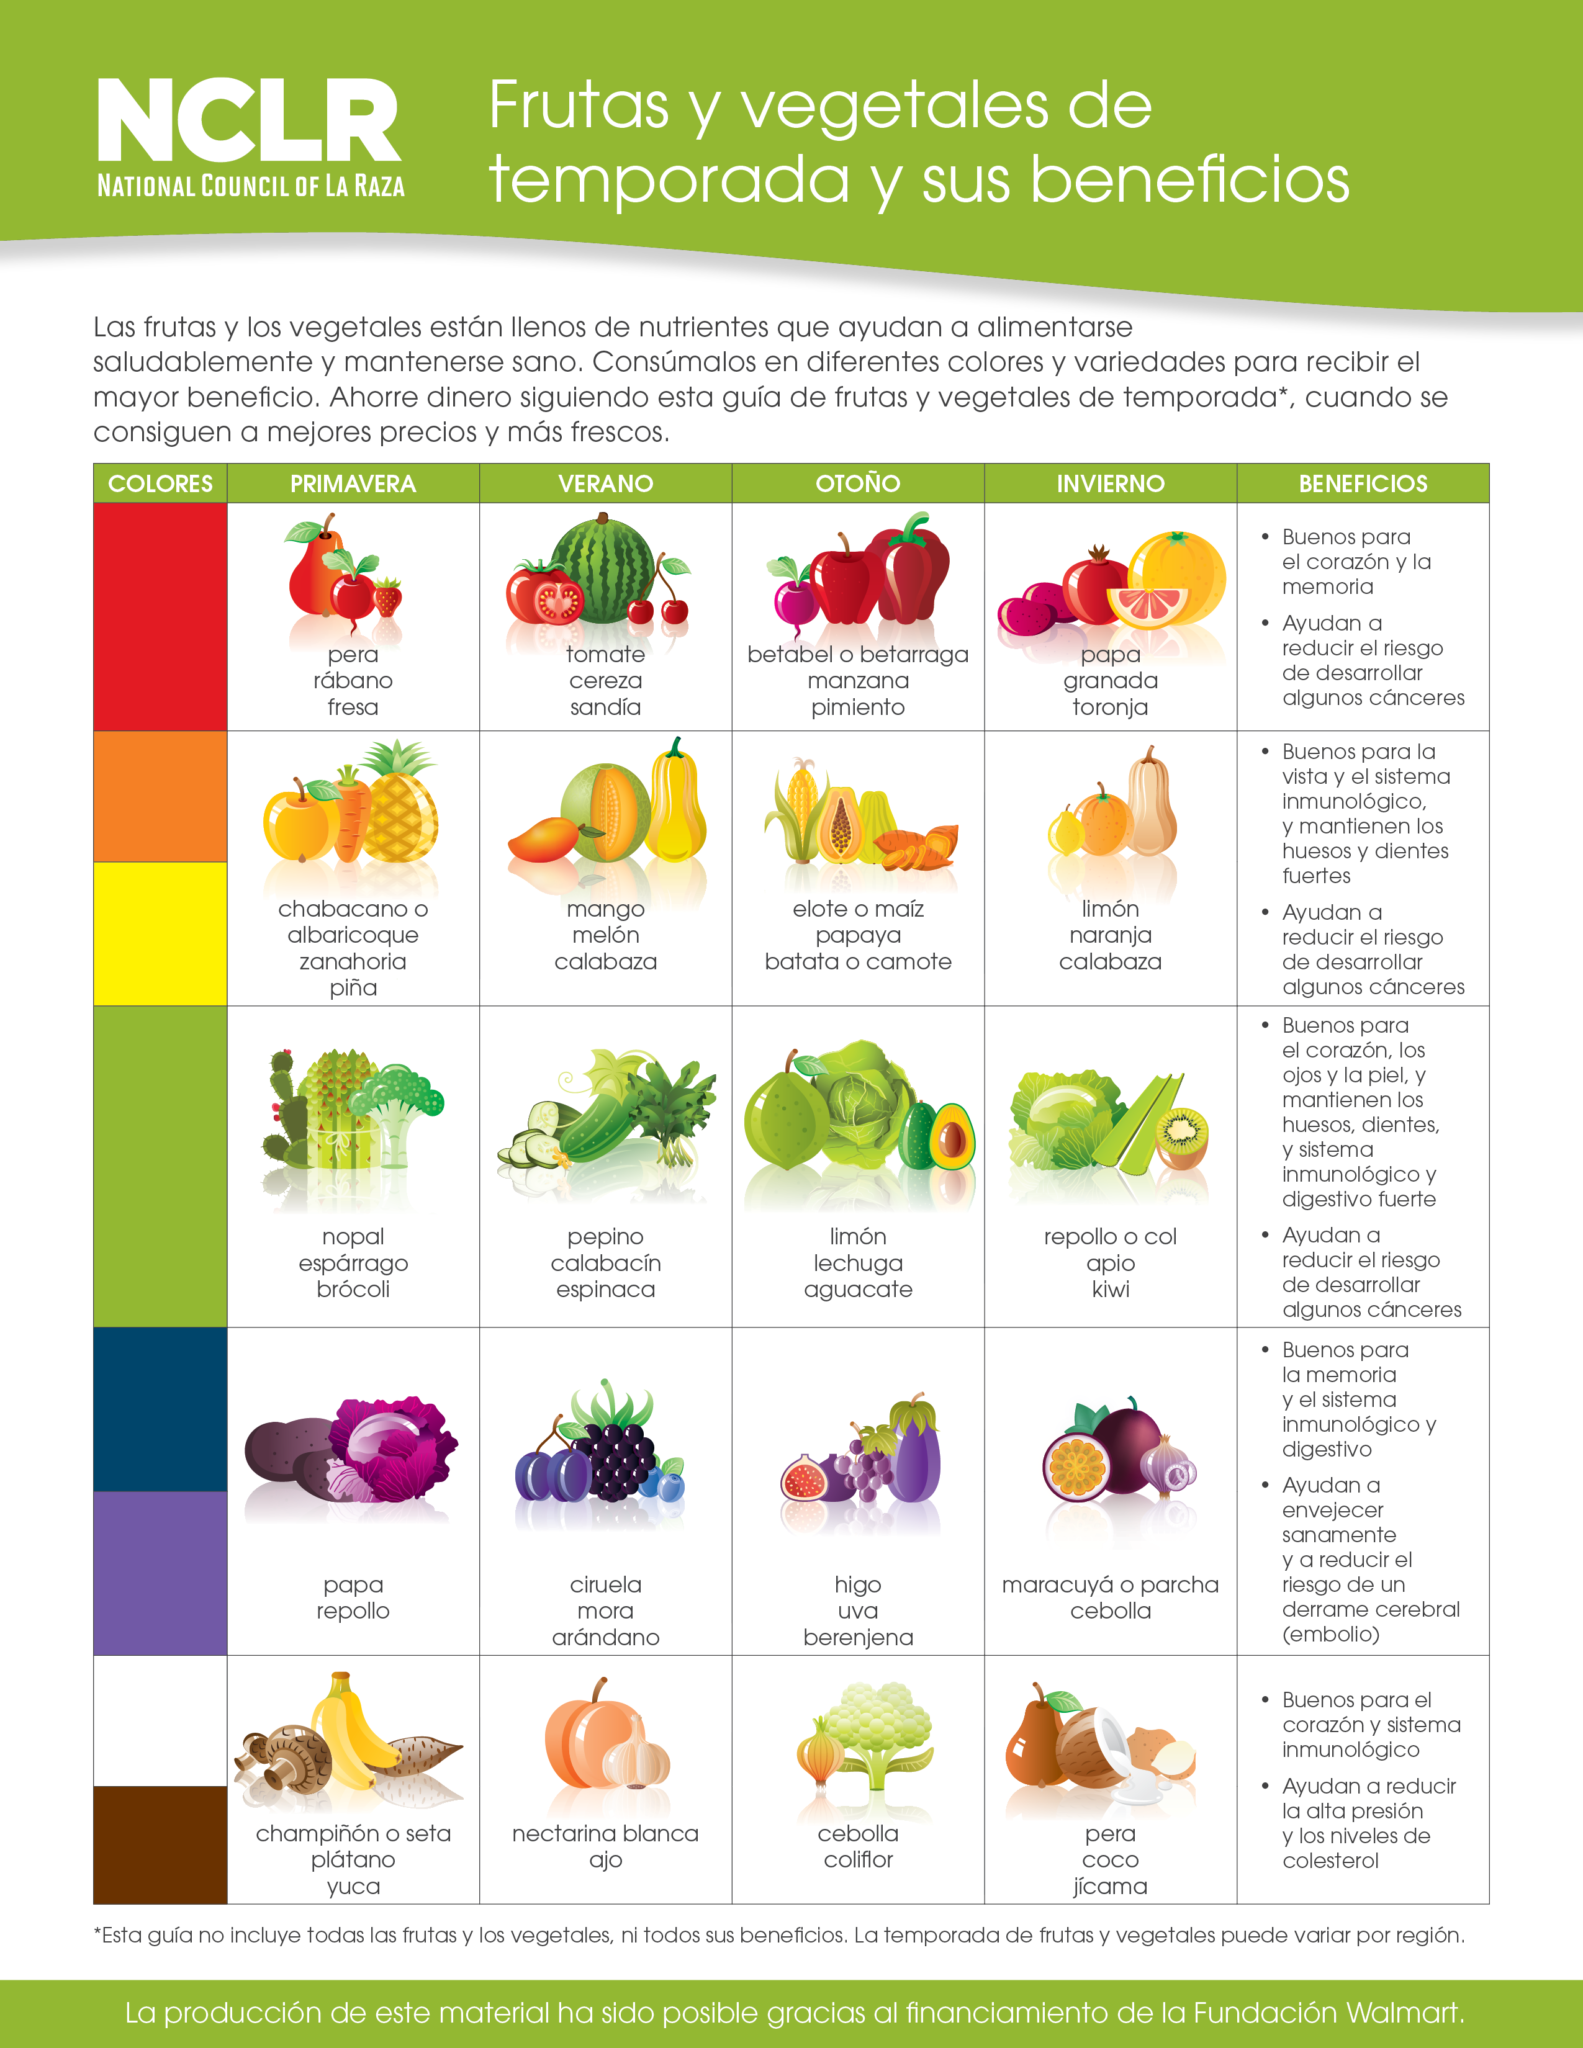 What Are the Benefits of Eating Seasonal Fruits and Vegetables